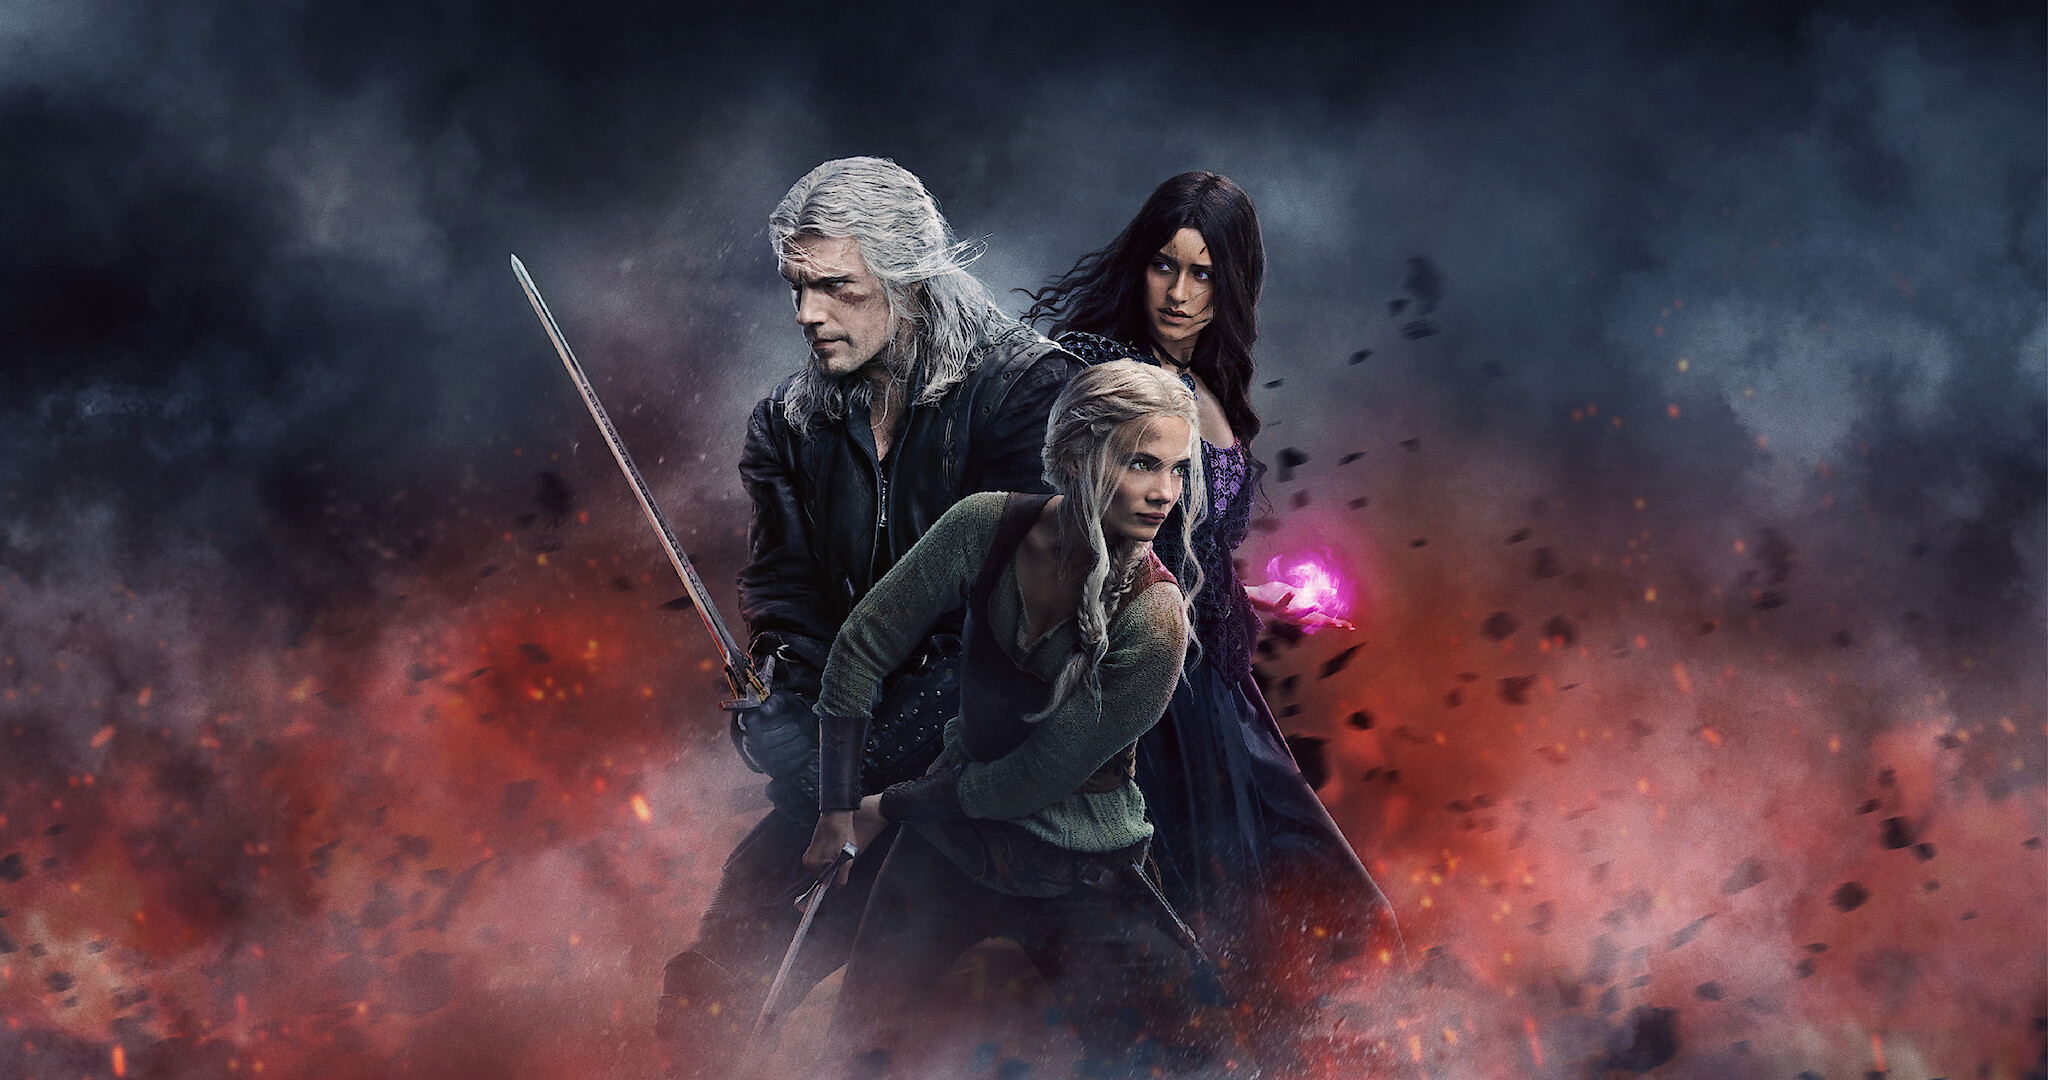 The Witcher Sirens of the Deep: Plot, Premiere Date, Teaser Trailer of  Animated Movie - Netflix Tudum